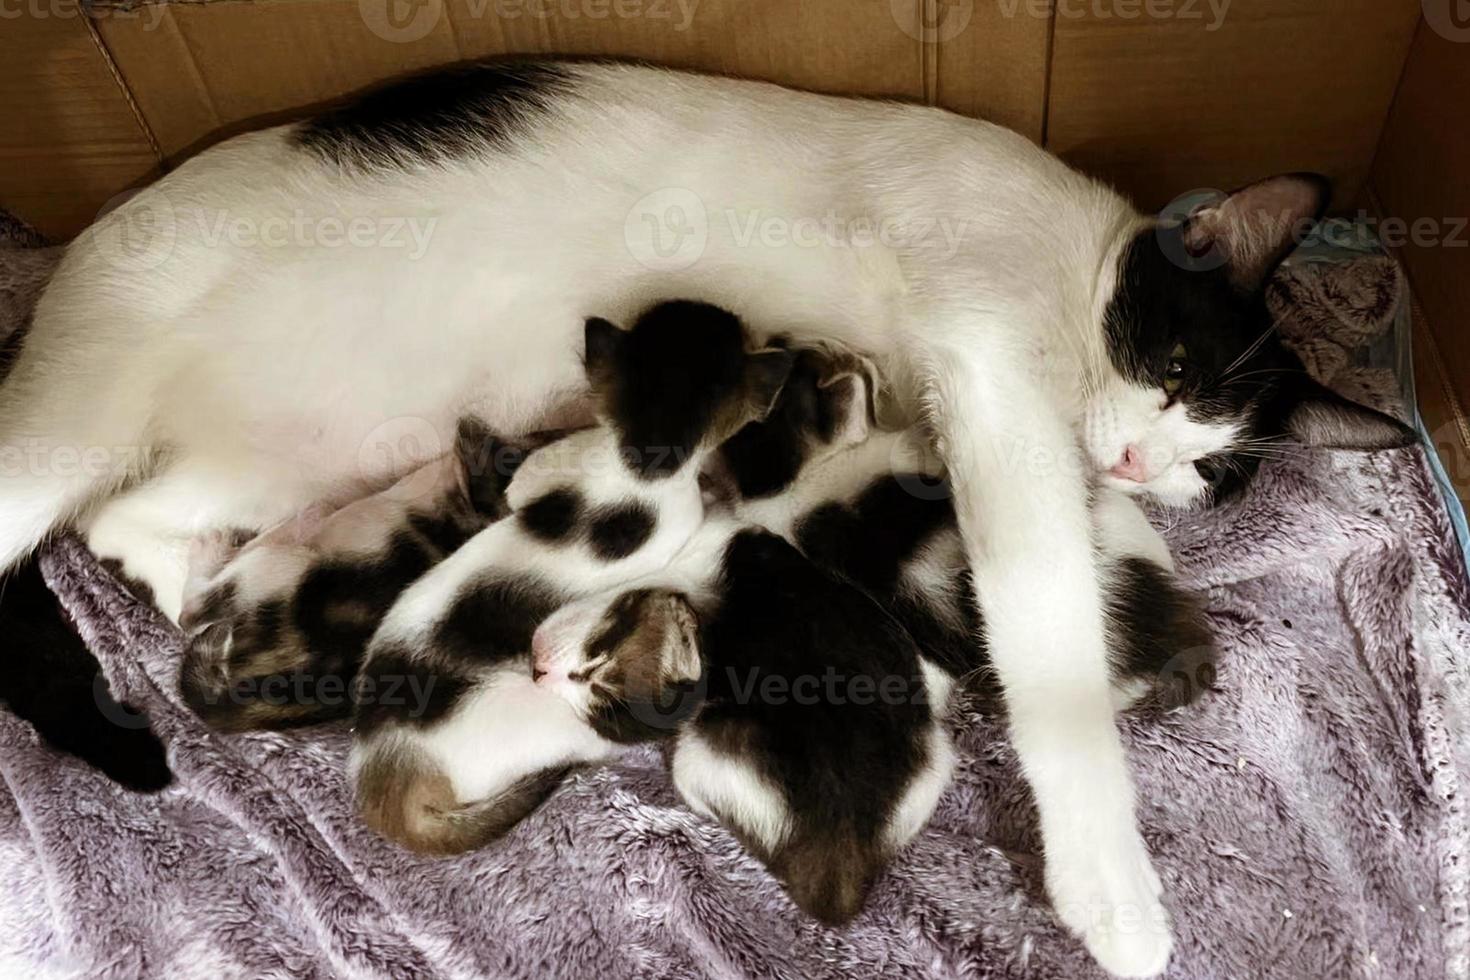 Cat nursing her little kittens, close up. Mother fluffy cat pregnant give birth. New born baby kittens drinking milk from their mom's breast. Newborn baby kittens. photo